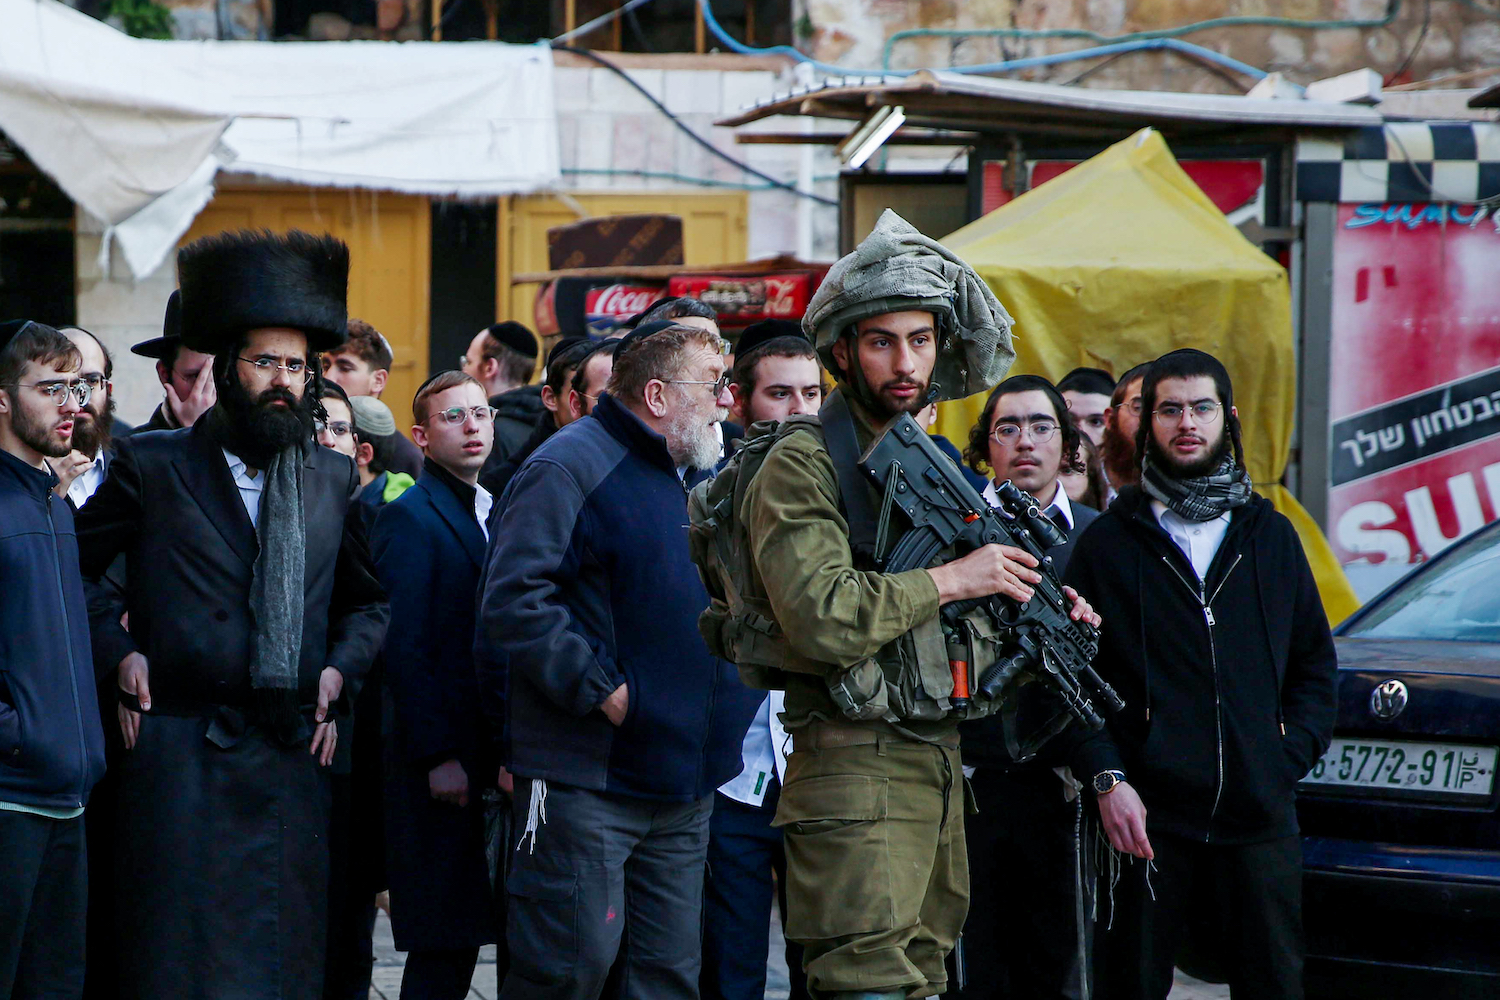 Israeli security forces guard as Jews tour in the West Bank city of Hebron, January 7, 2023. Photo by Wisam Hashlamoun/Flash90